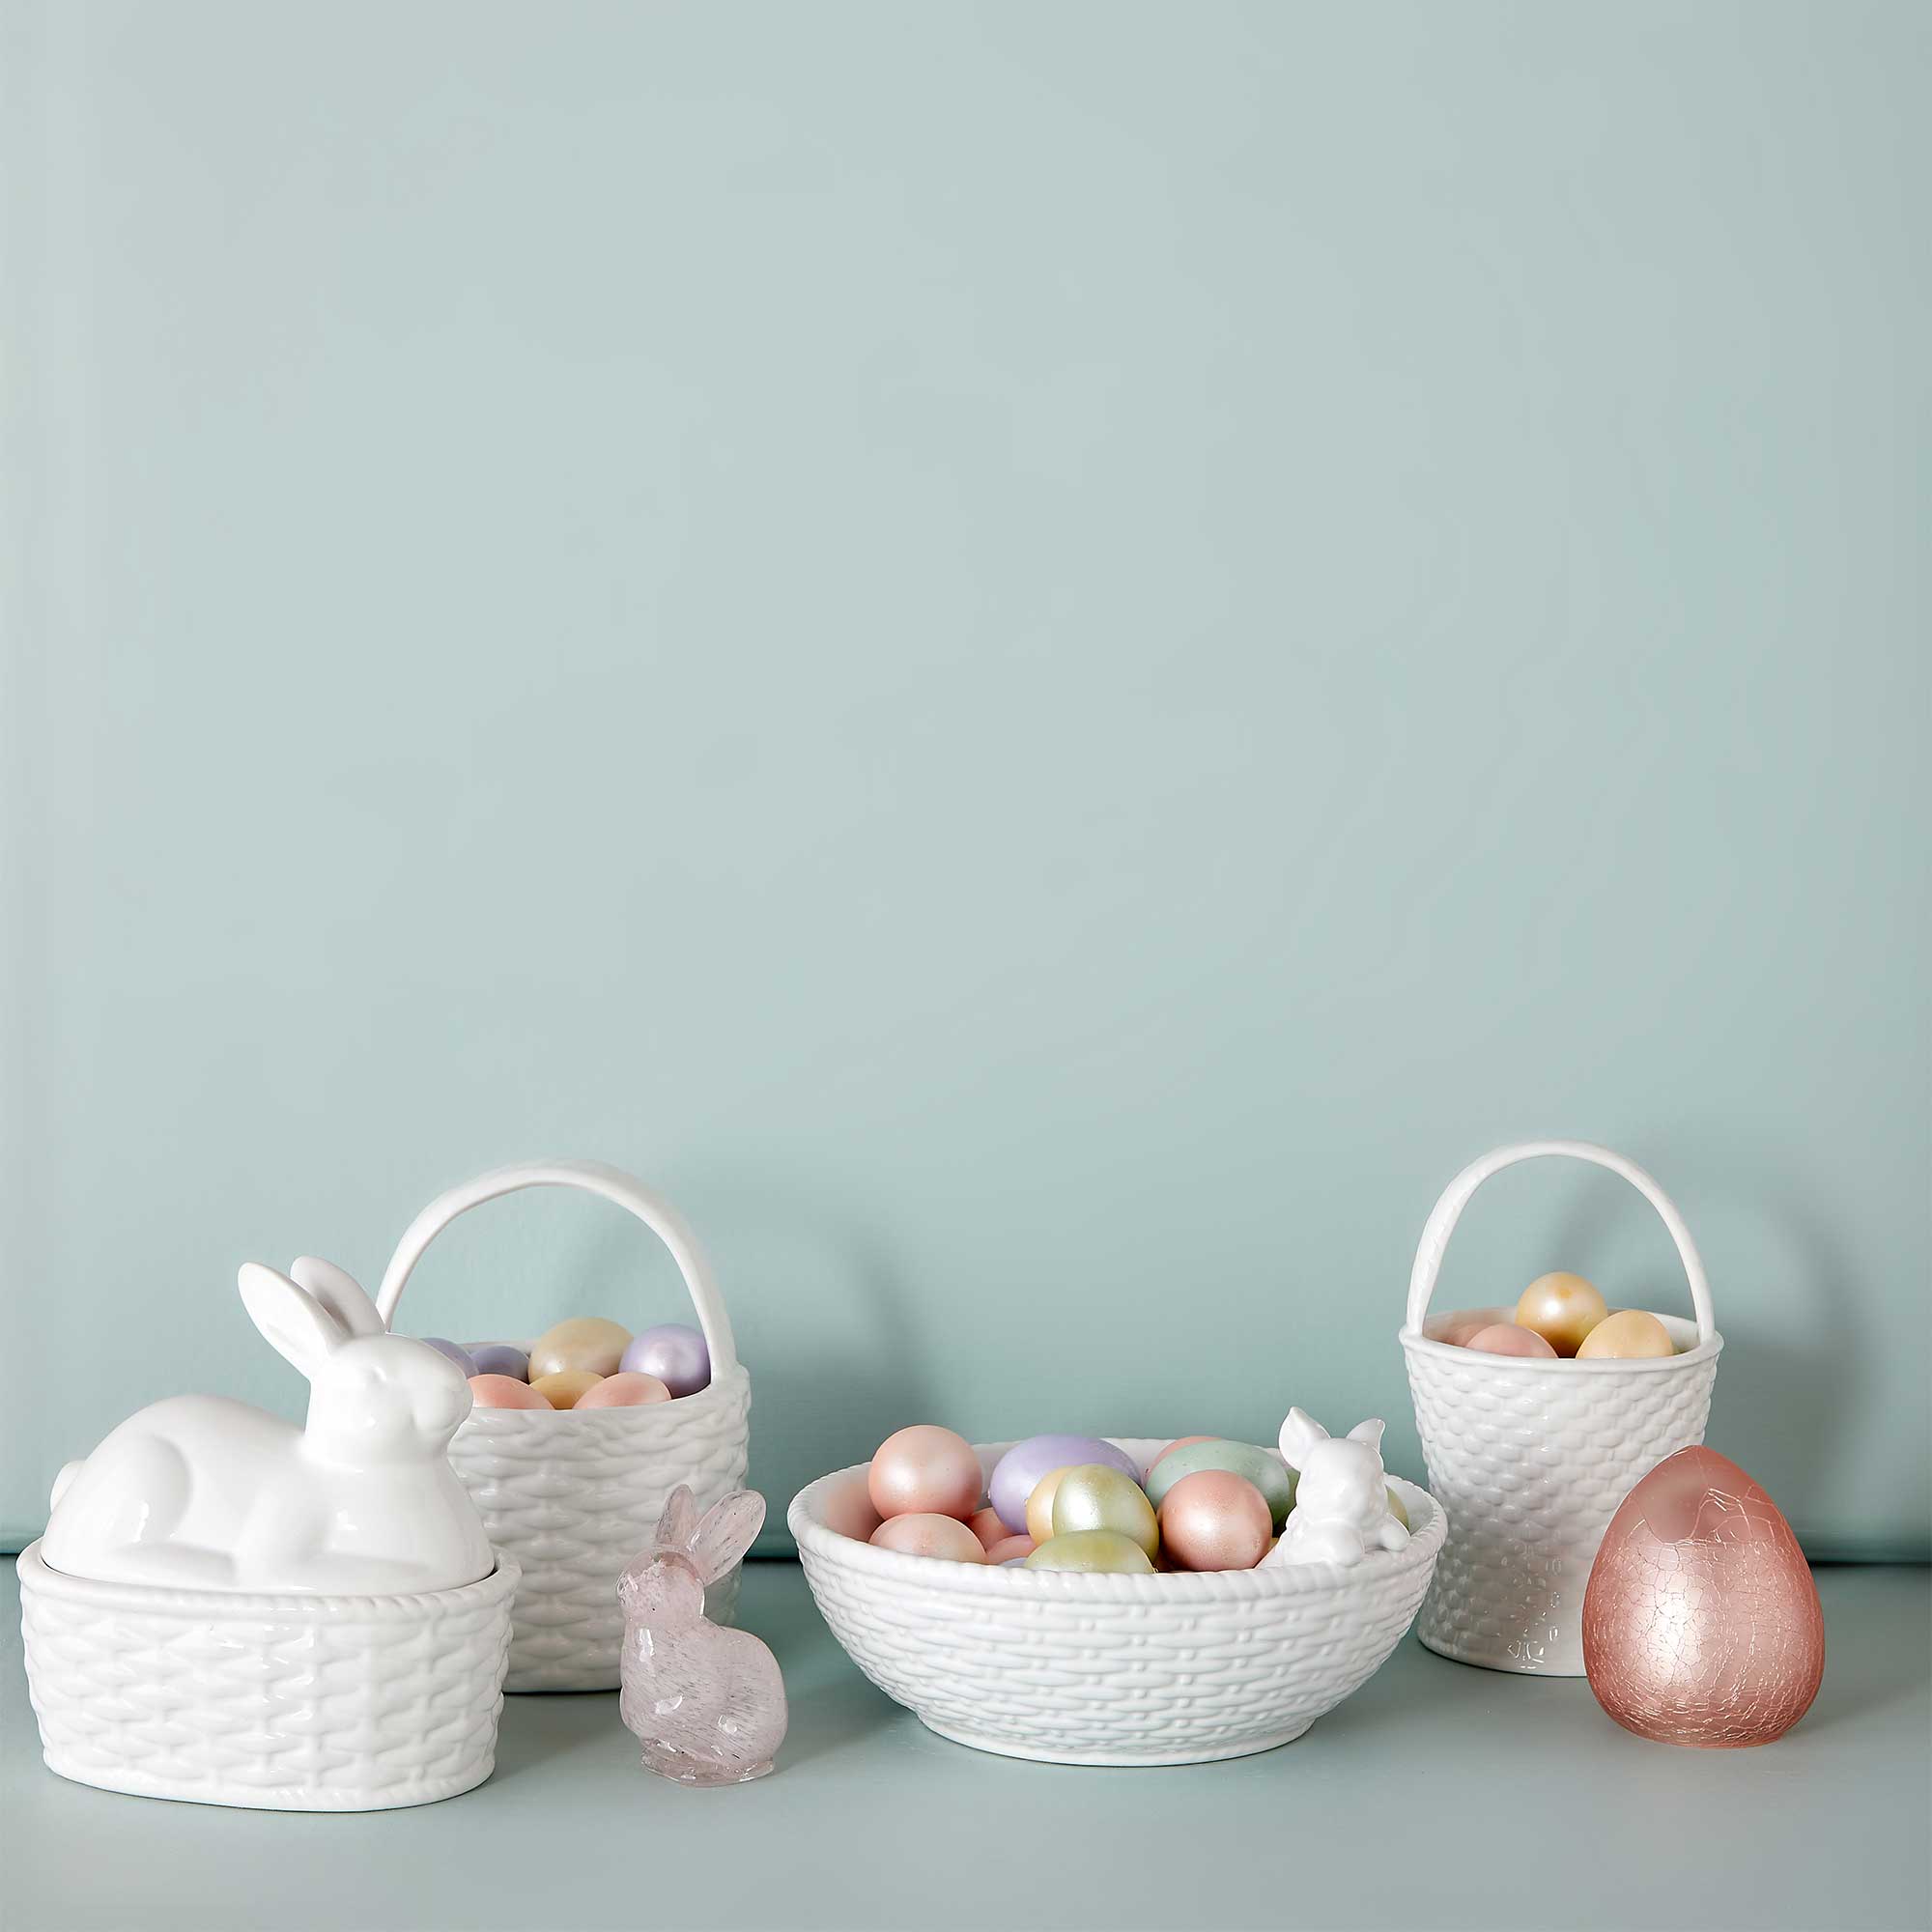 Balboa Baskets in White Ceramic with Easter Eggs and Bunnies